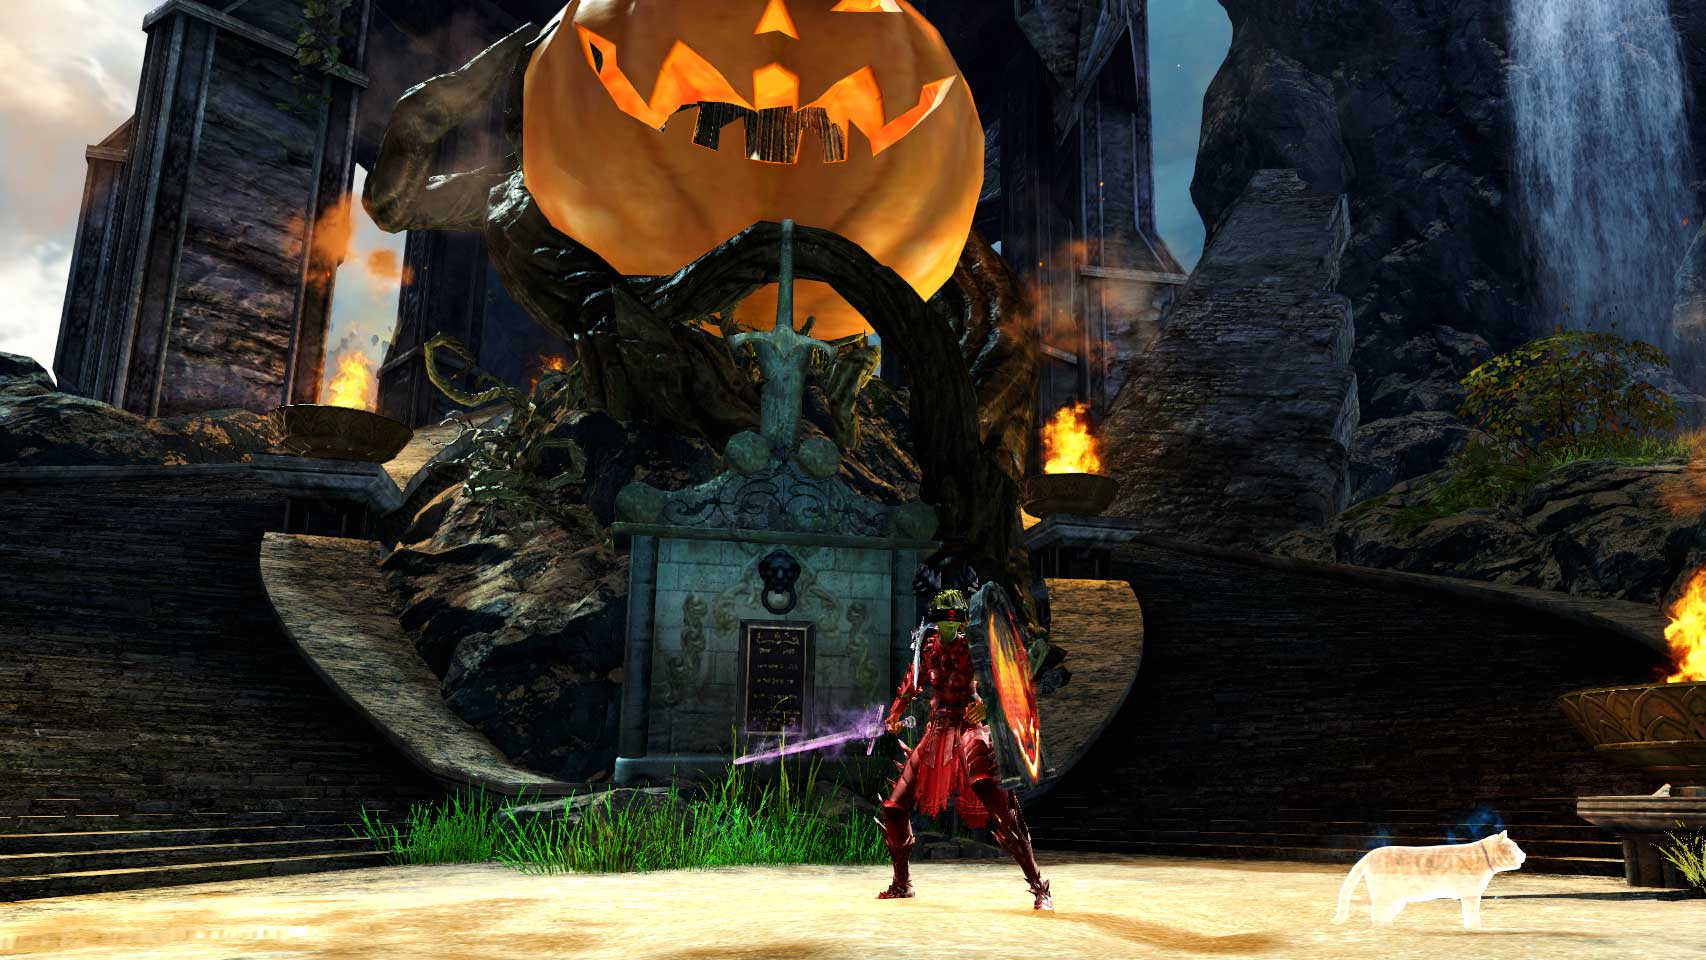 Gothic Sans standing in front of the PvP memorial plaque, which is now adorned with a giant jack o'lantern.